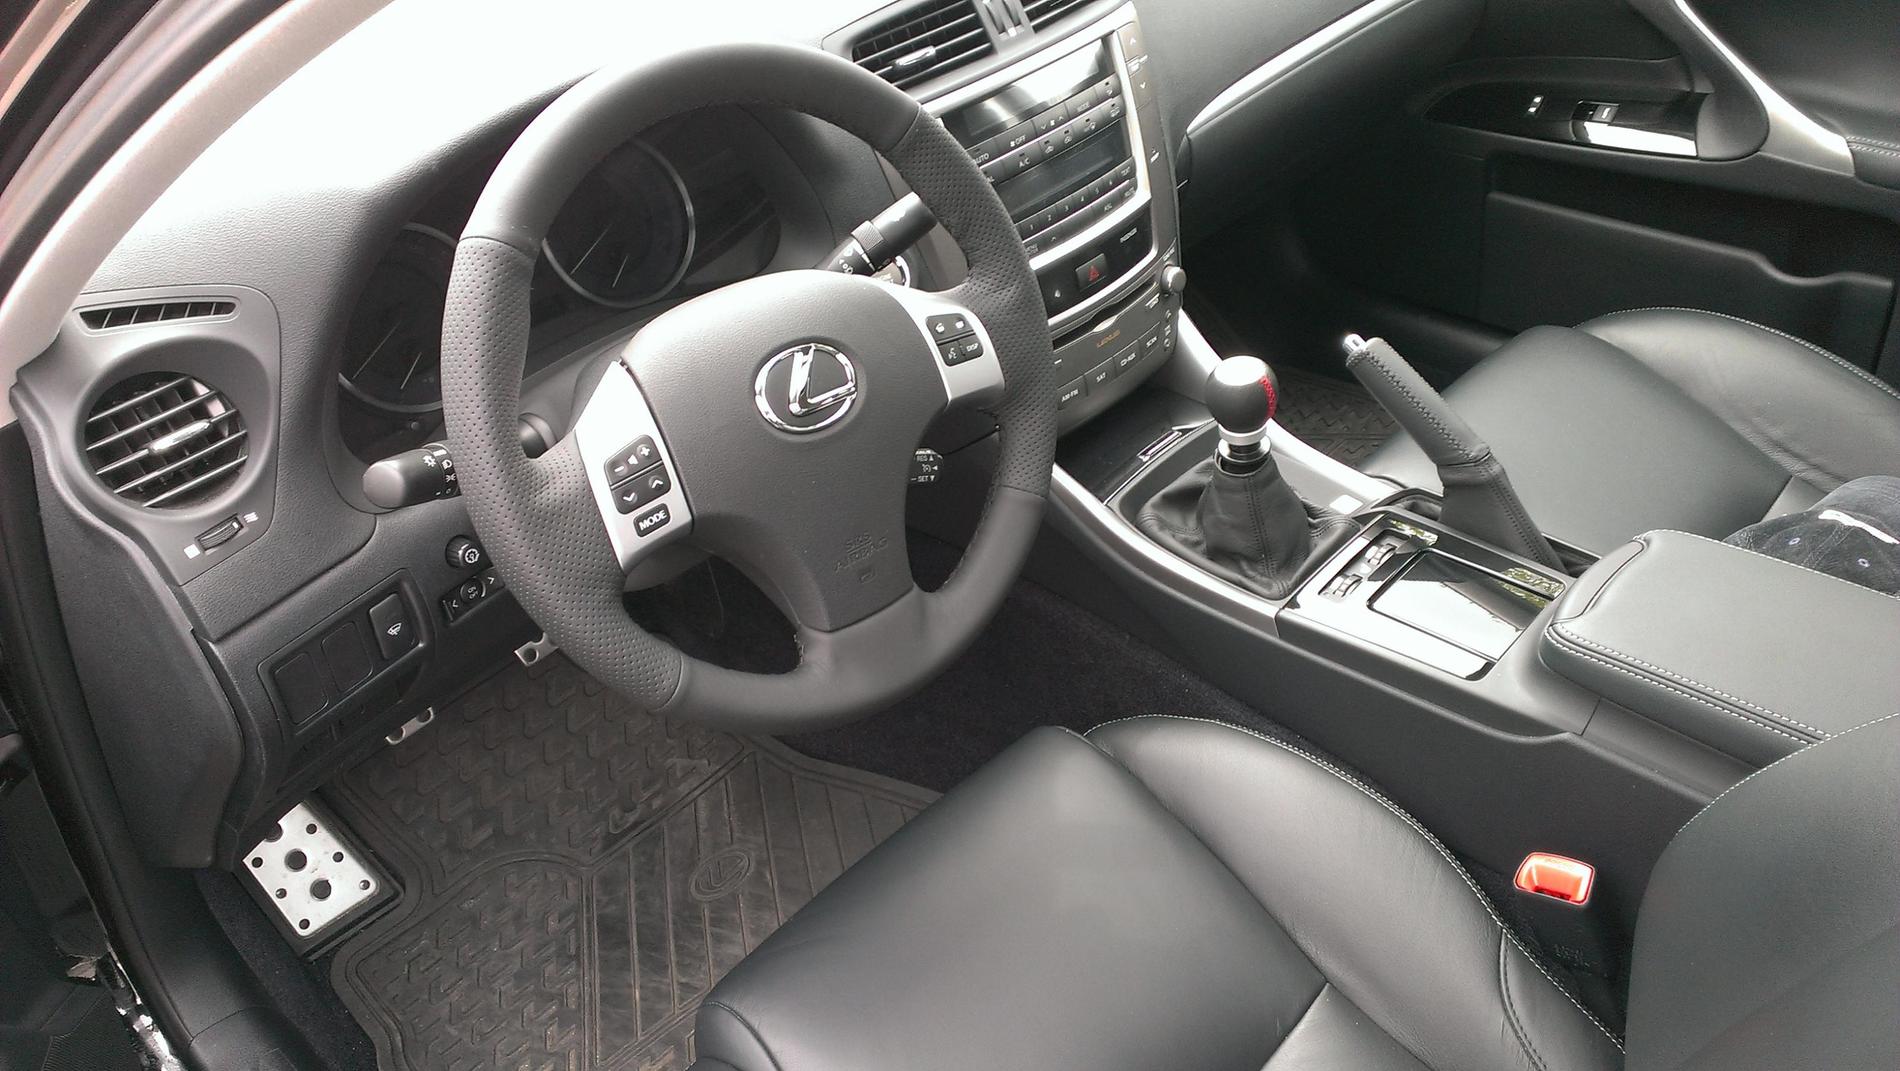 fashionable-design-lexus-es-350-manual-how-many-transmission-have-been-produced-for-the-2nd-gen.jpg